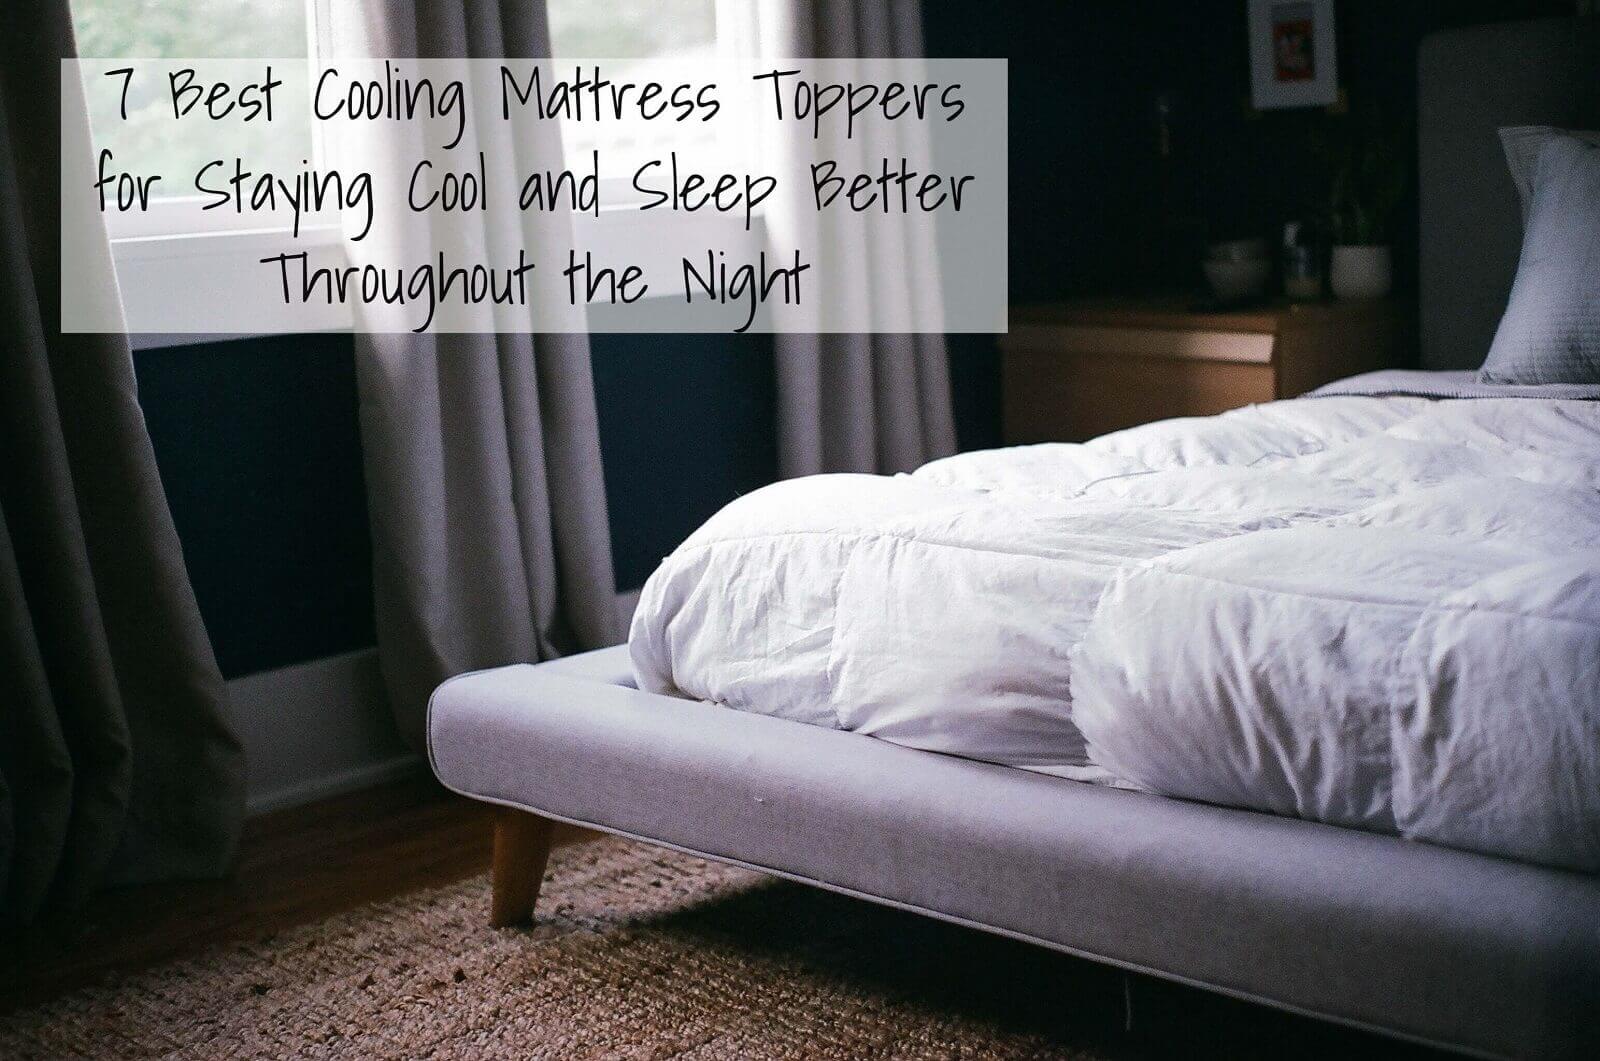 Best Cooling Mattress Toppers For Better Sleep,Checkers Strategy Book